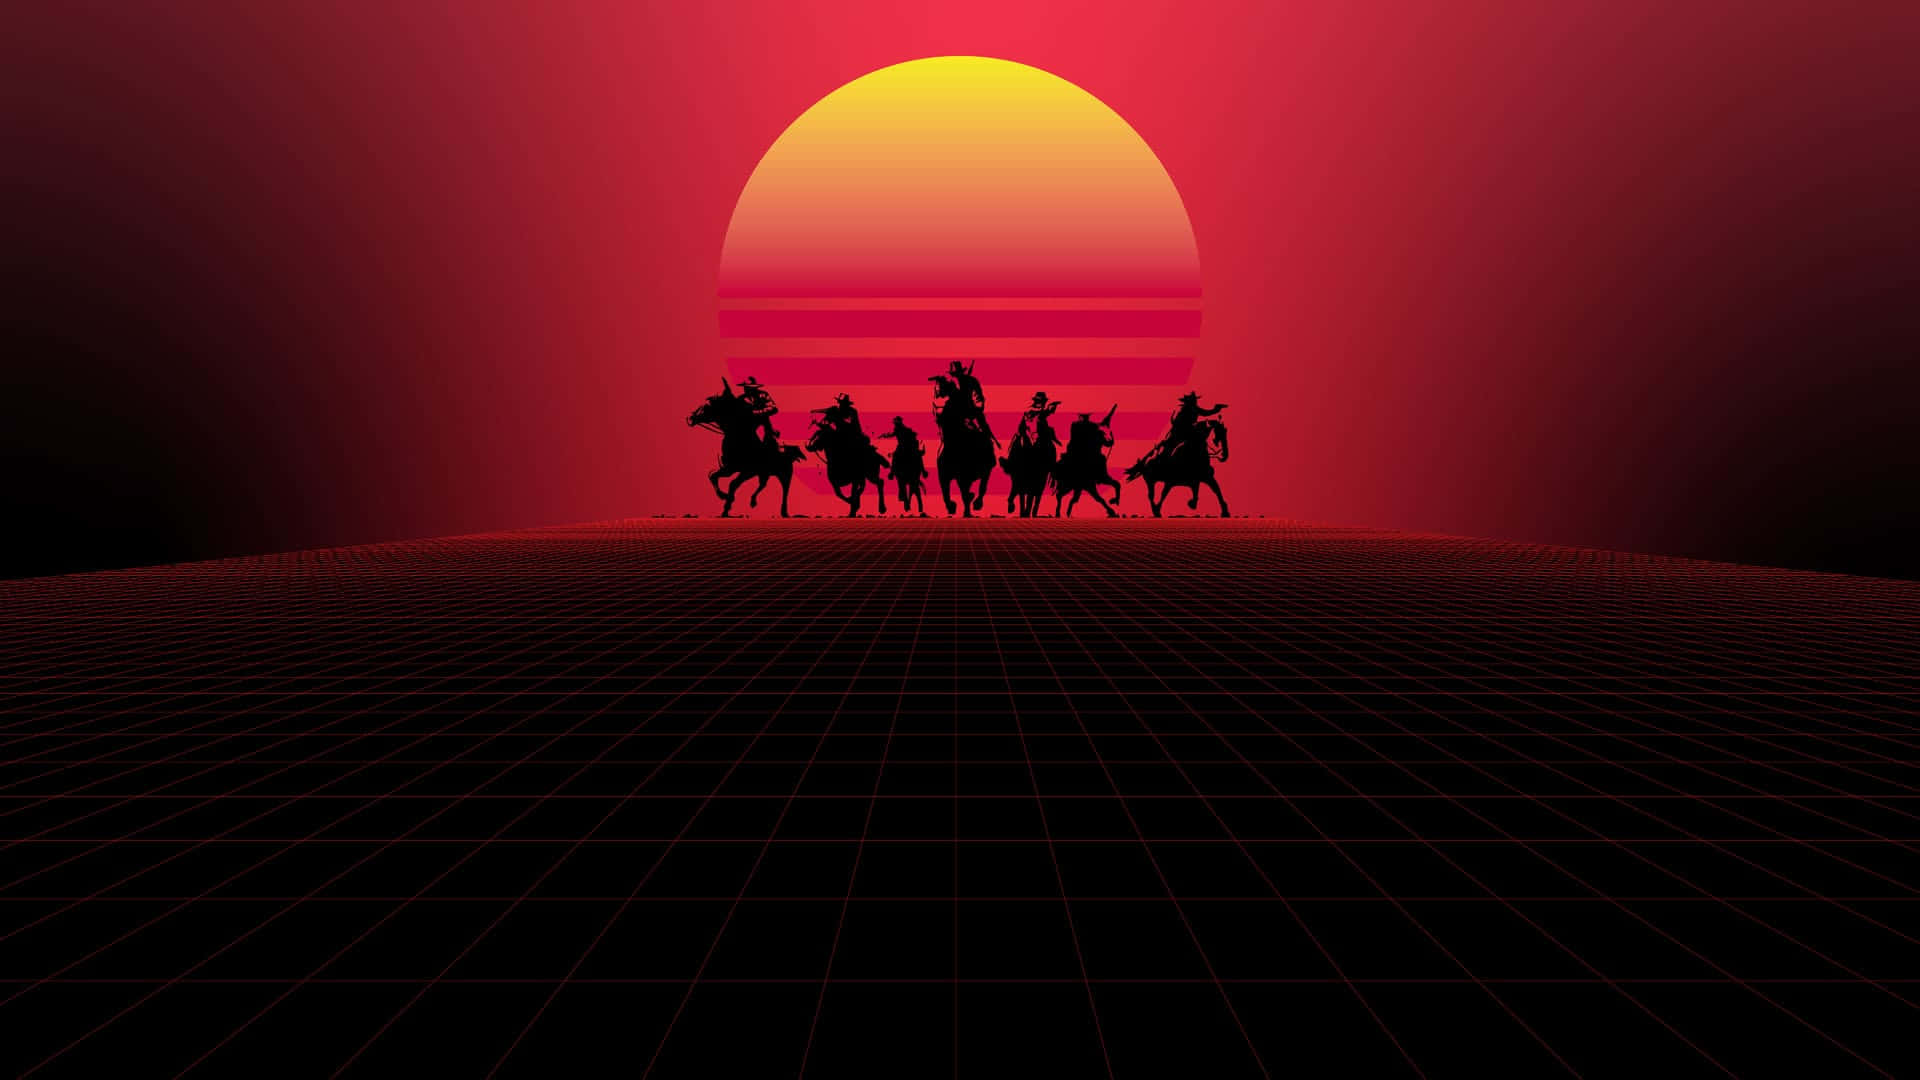 Characters And Sunset Aesthetic 1920x1080 Red Dead Redemption 2 Background